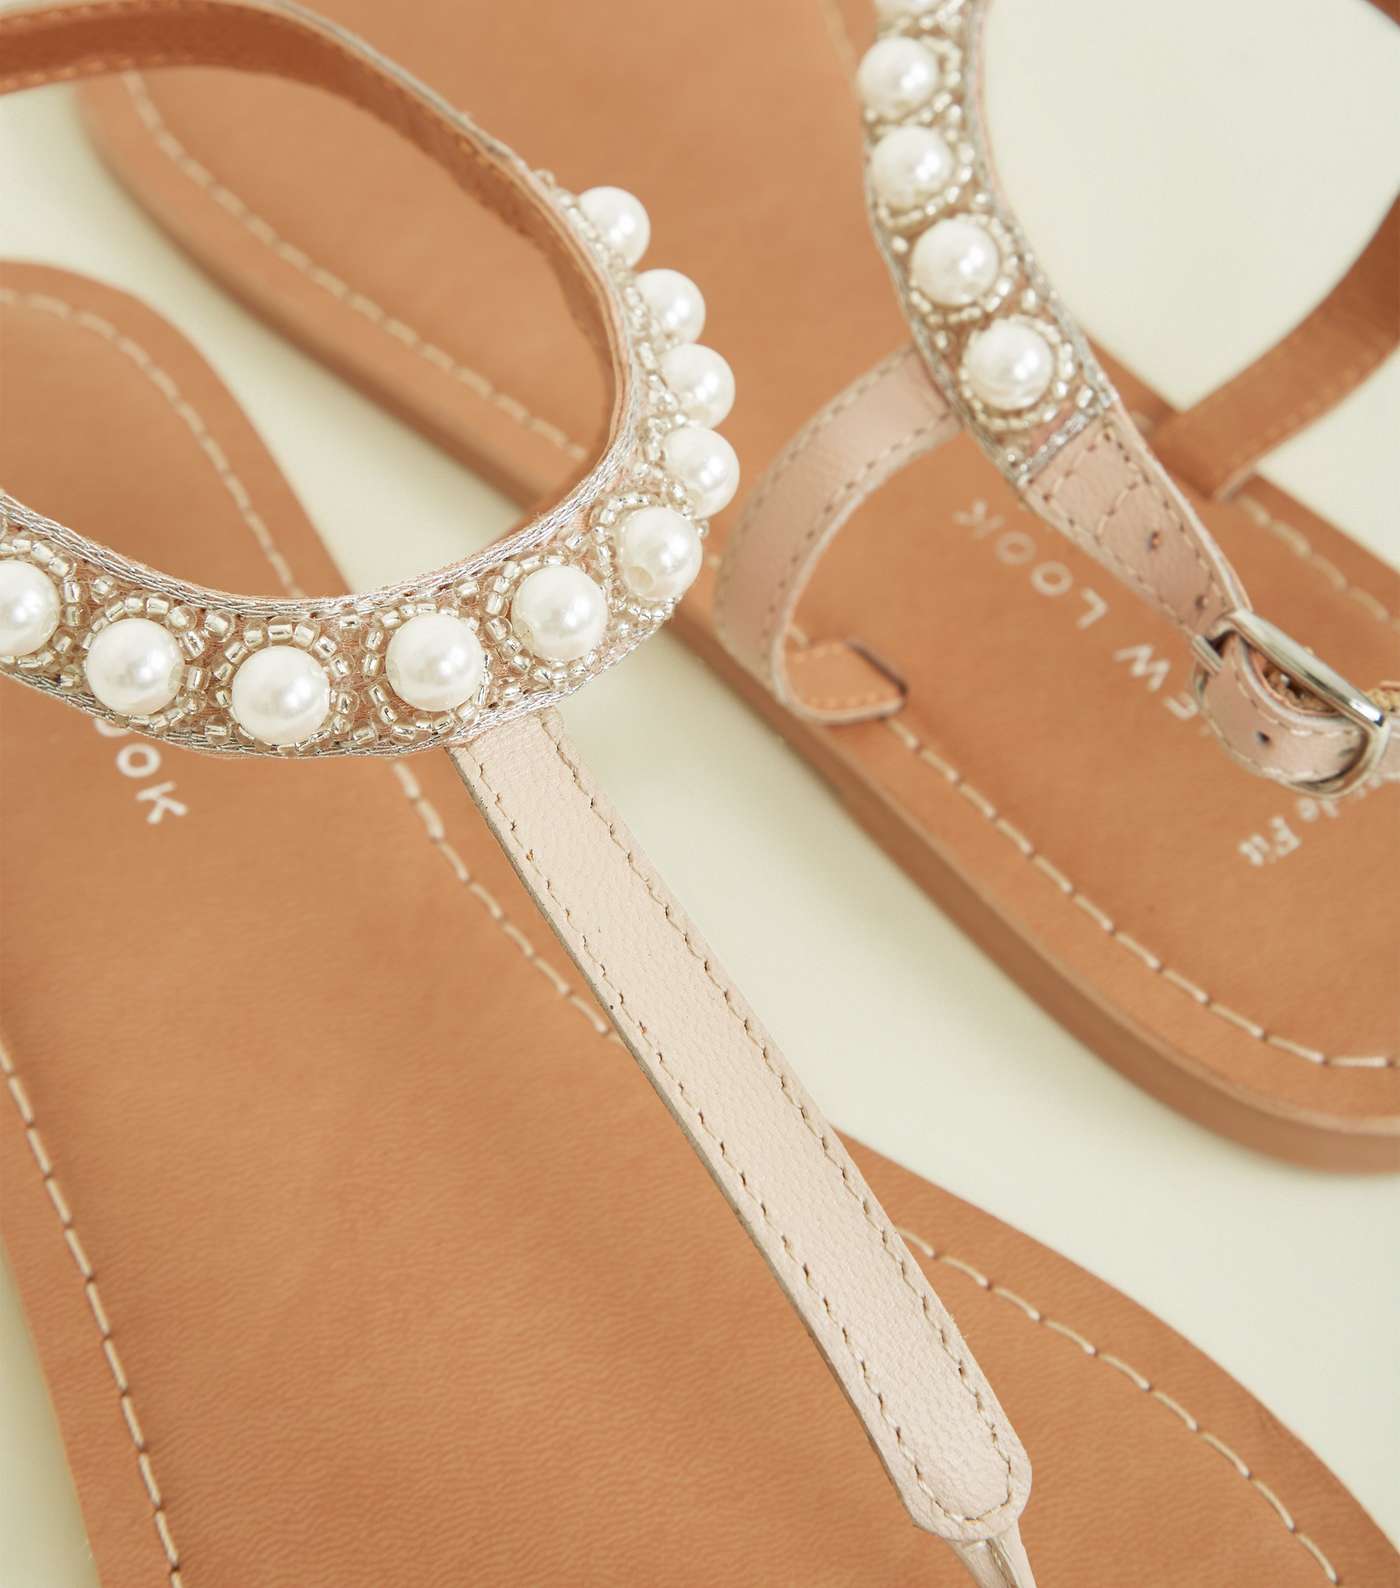 Wide Fit Nude Leather Faux Pearl Embellished Sandals  Image 4